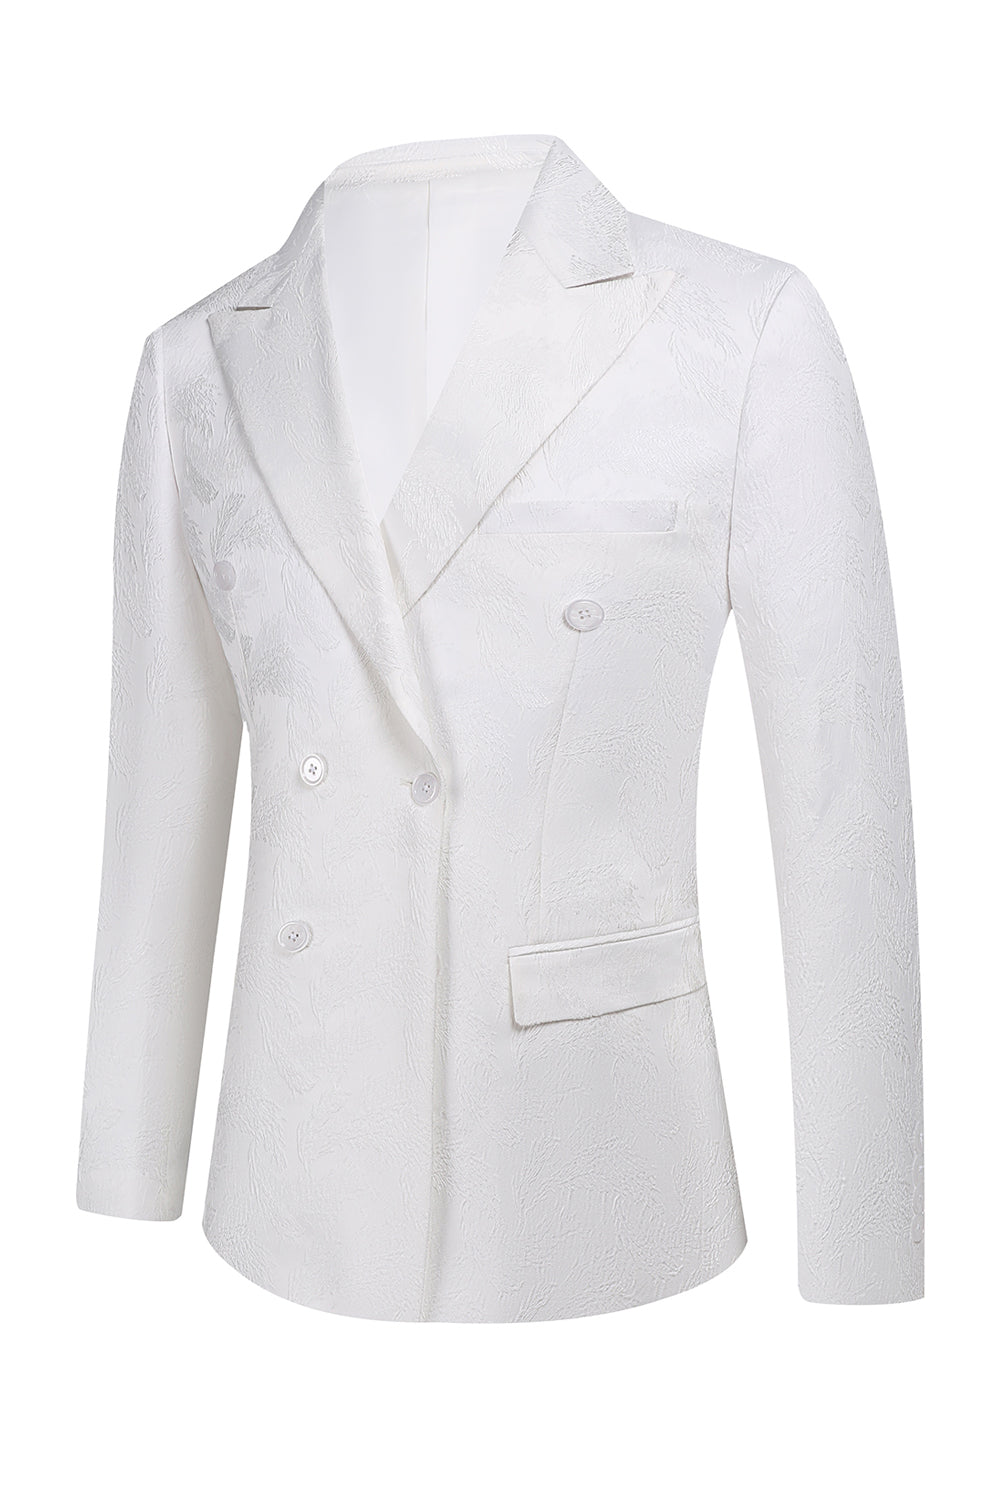 White Jacquard Double Breasted 2 Piece Men's Suits